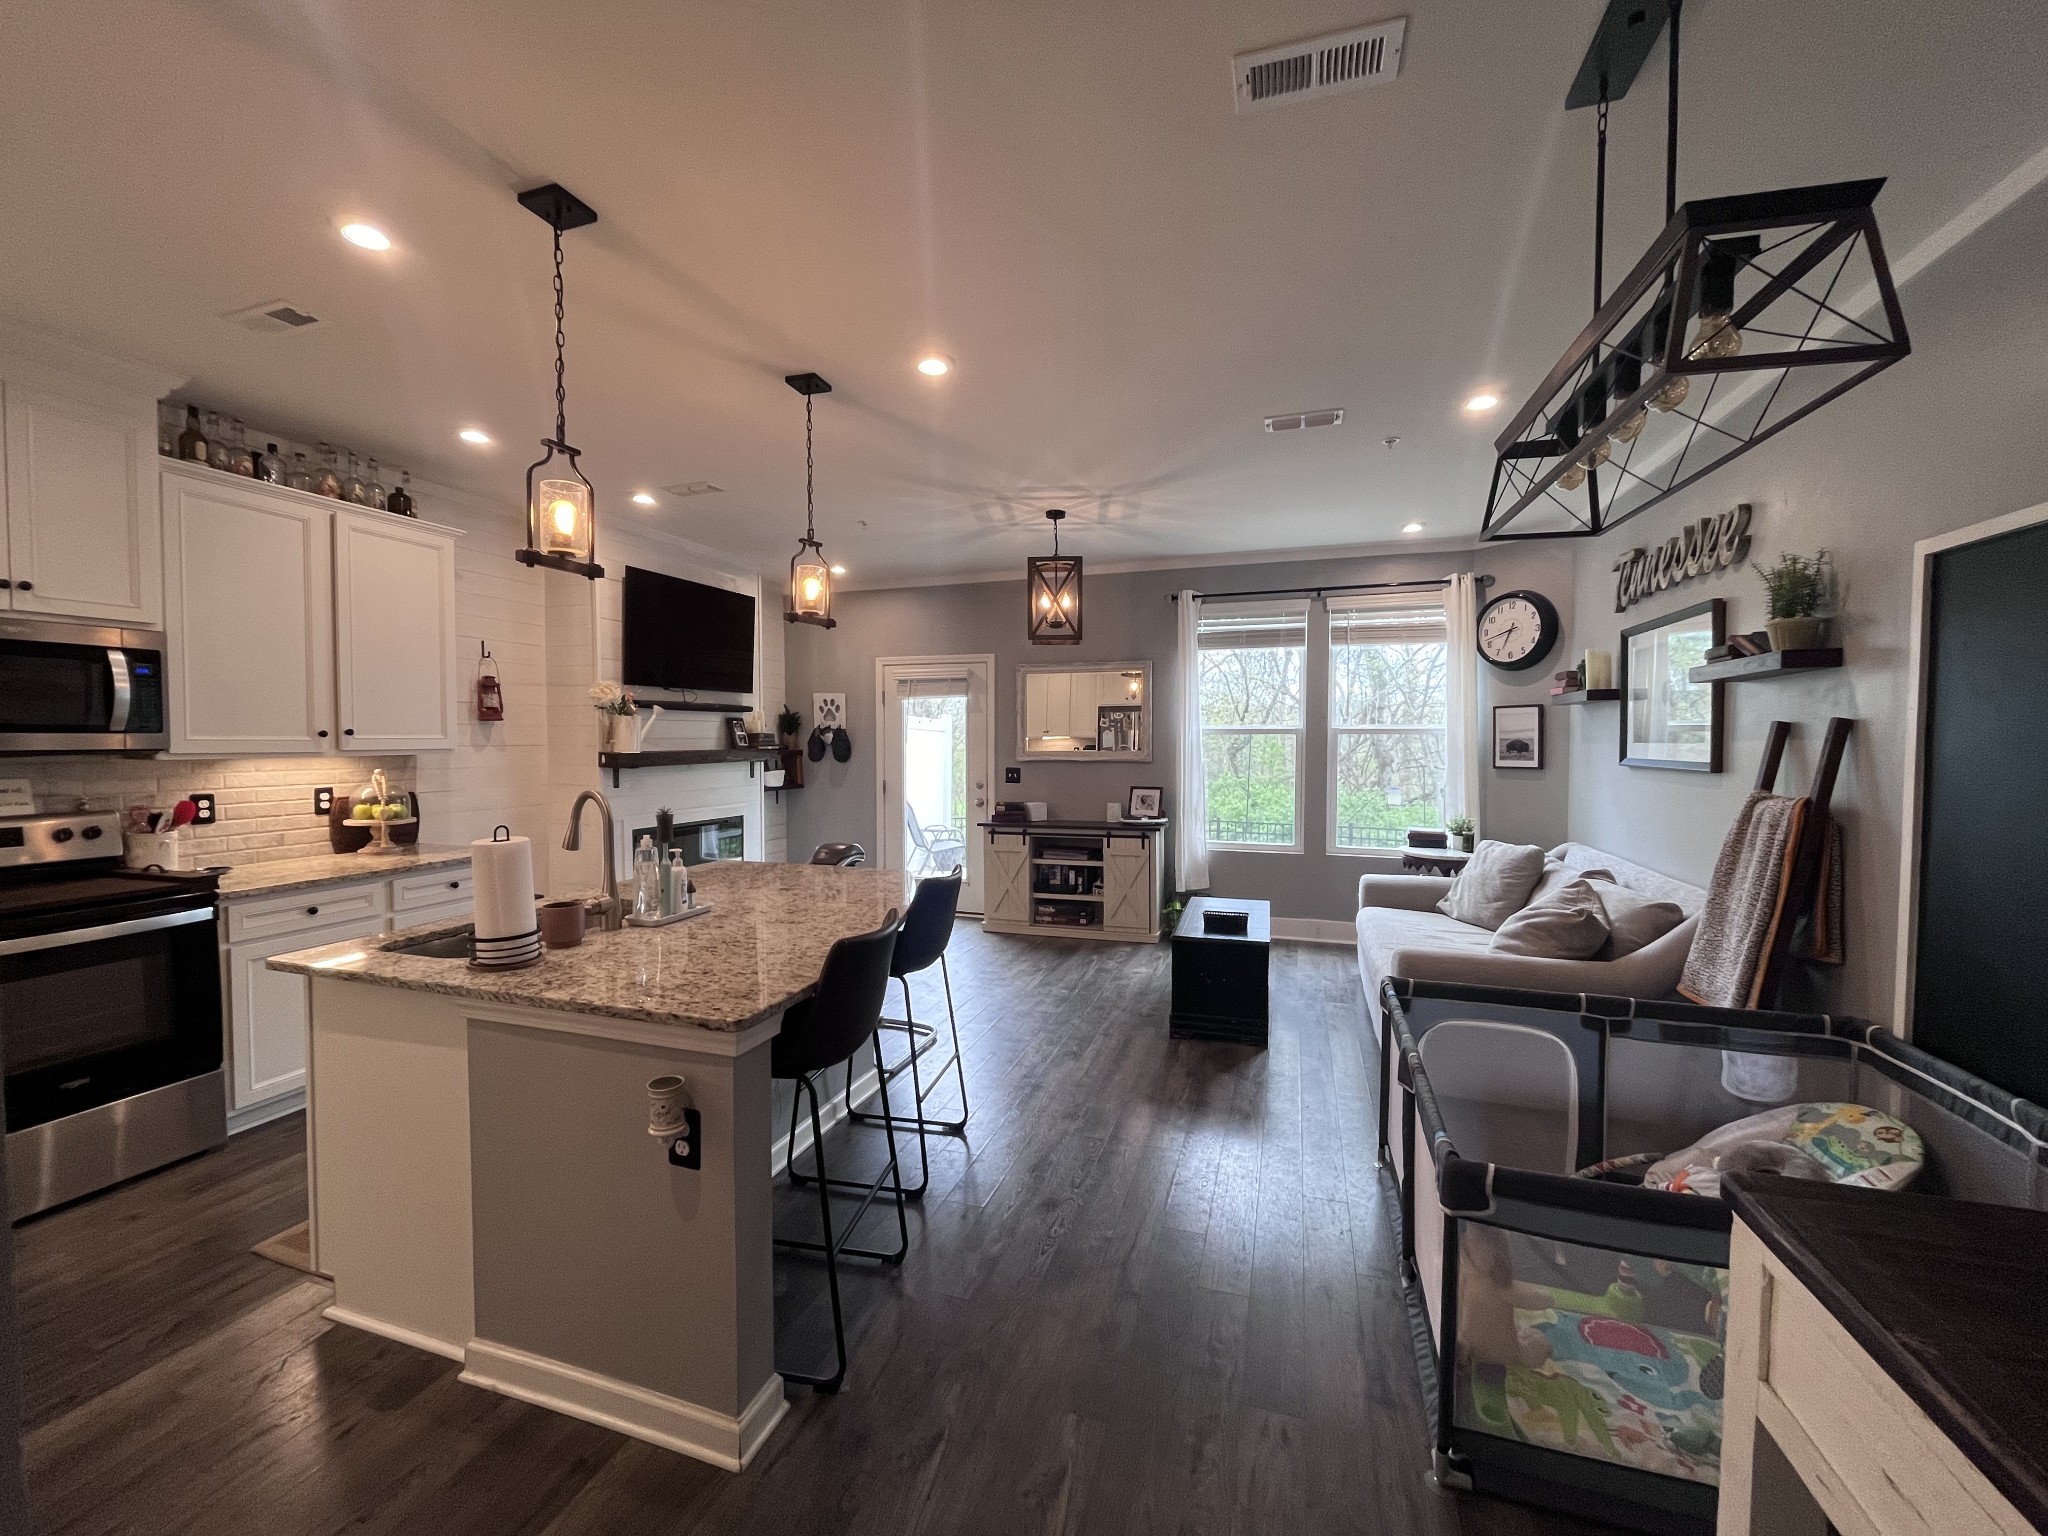 a kitchen with stainless steel appliances kitchen island granite countertop a stove a refrigerator a sink dishwasher a dining table and chairs with wooden floor